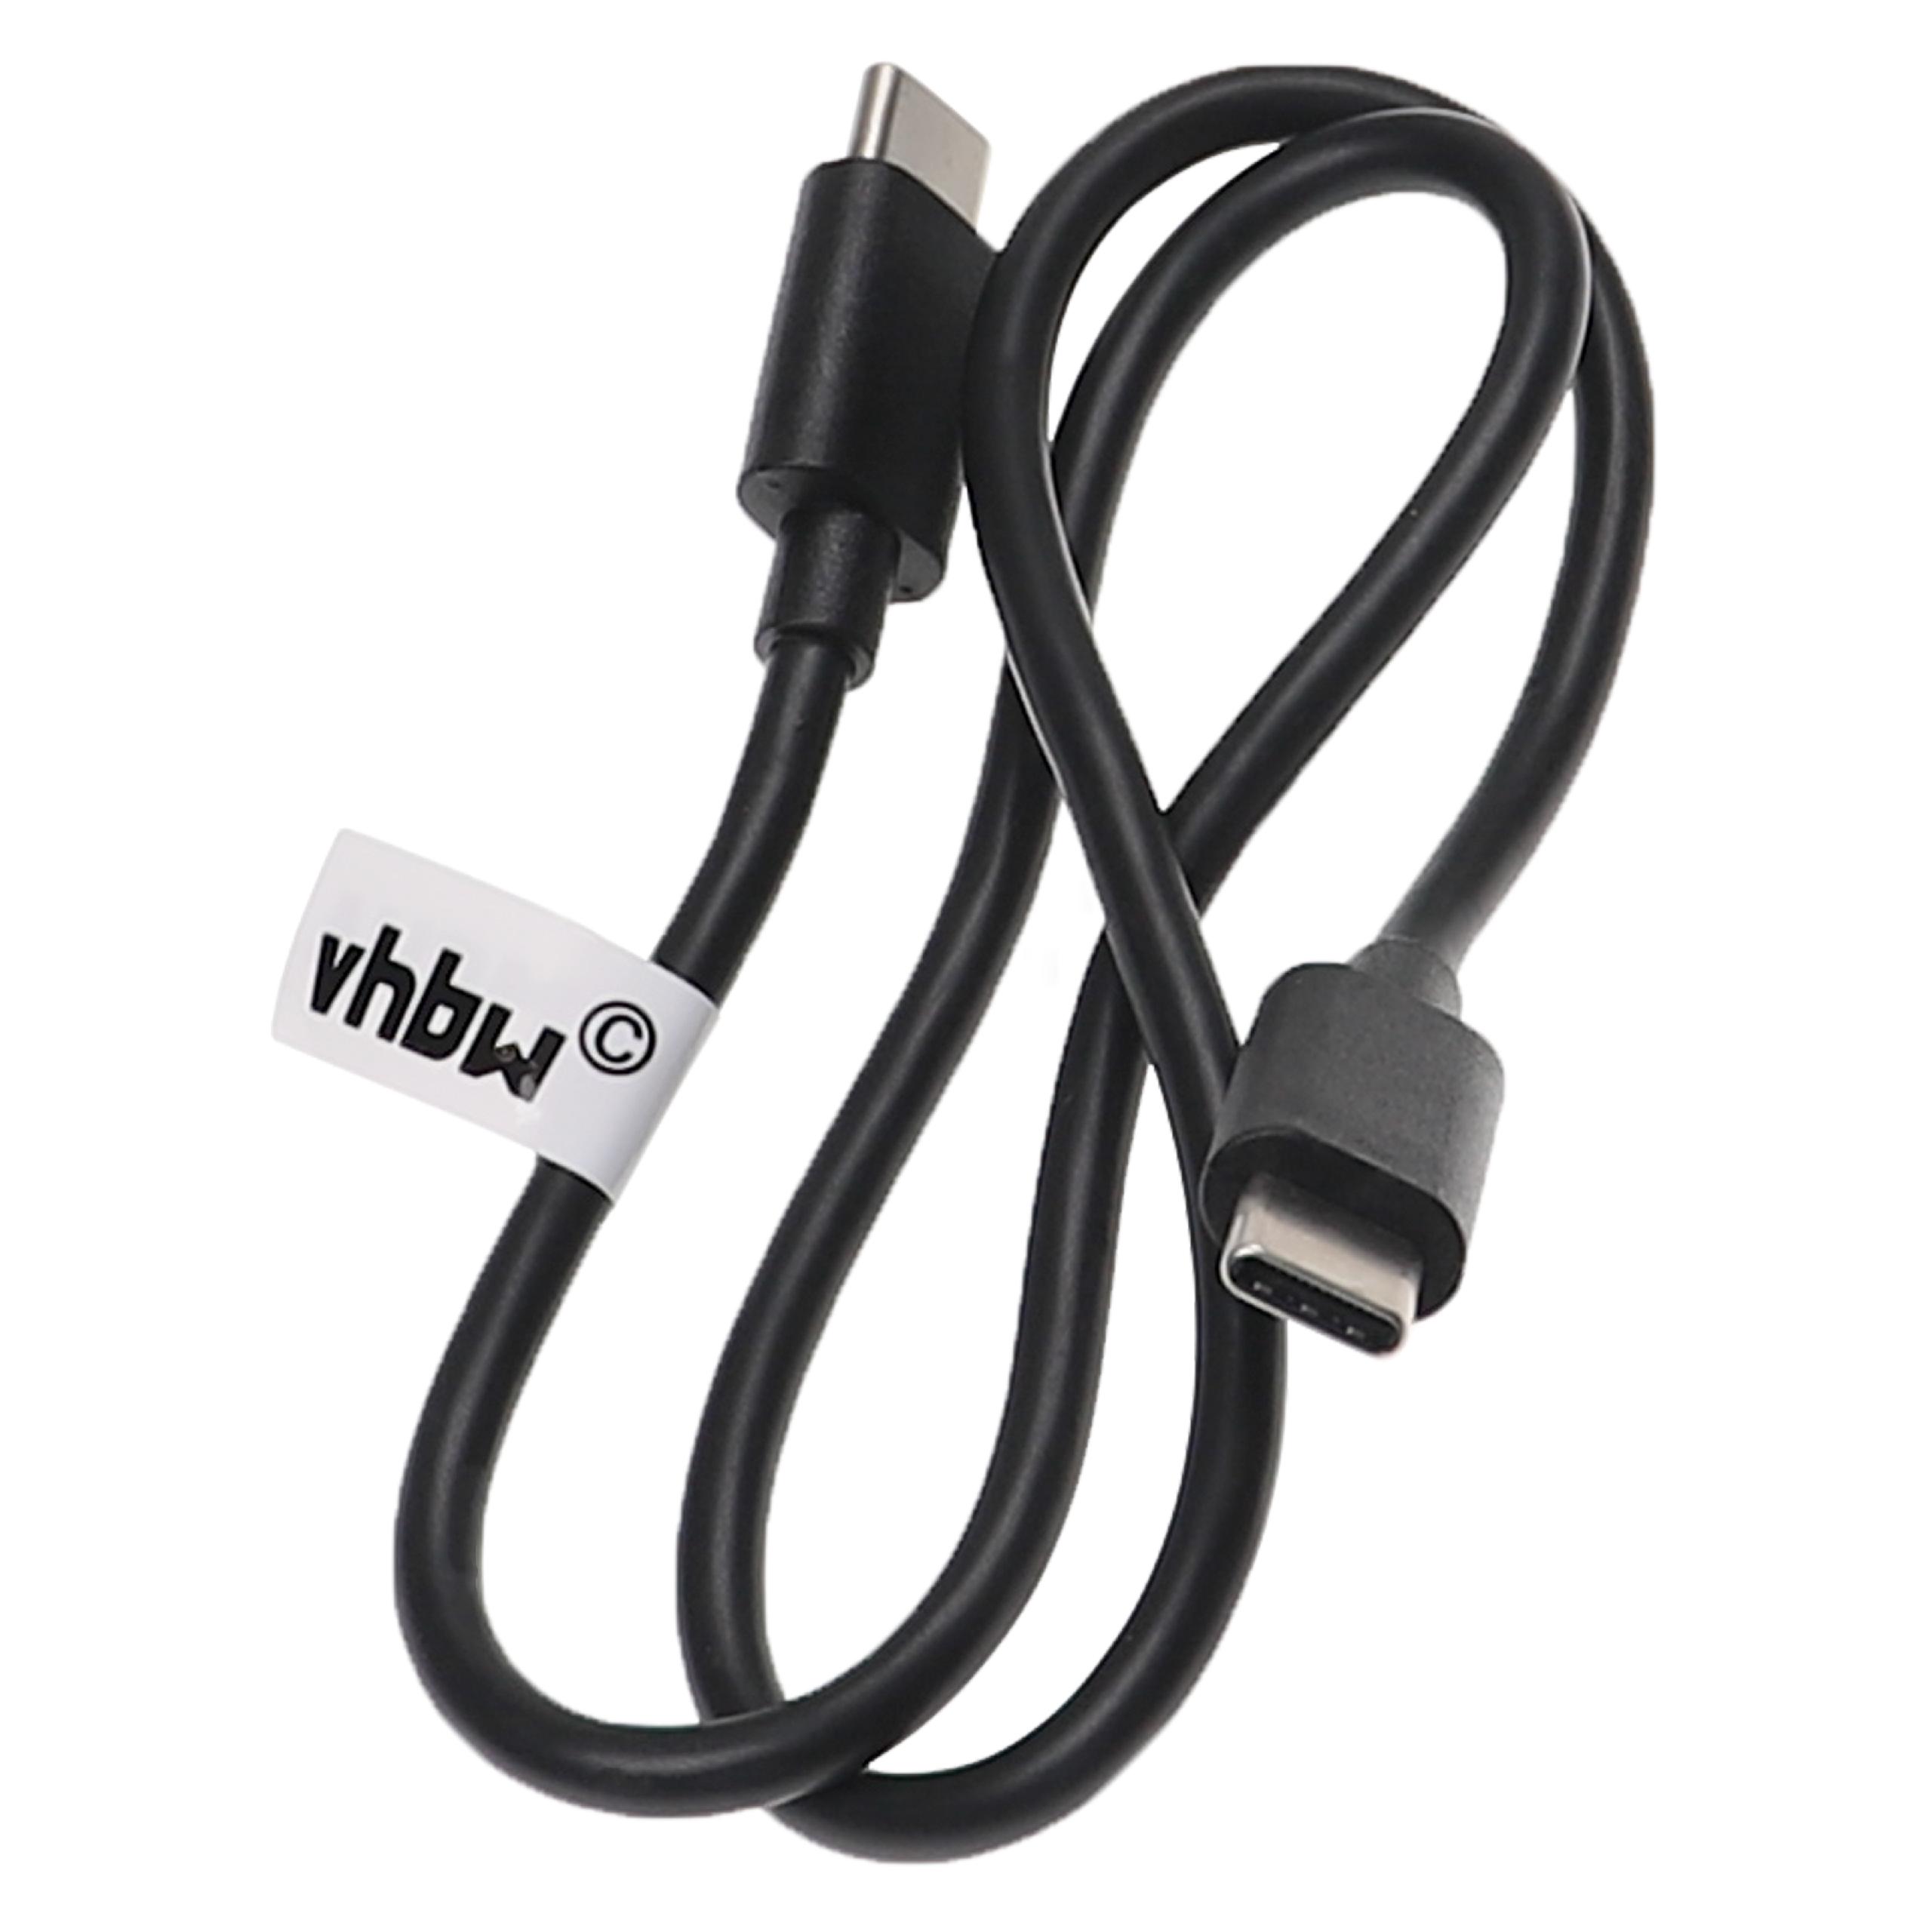 USB Fast Charging Cable suitable for various Laptops, Tablets, Smartphones - USB Cable 50 cm, Black